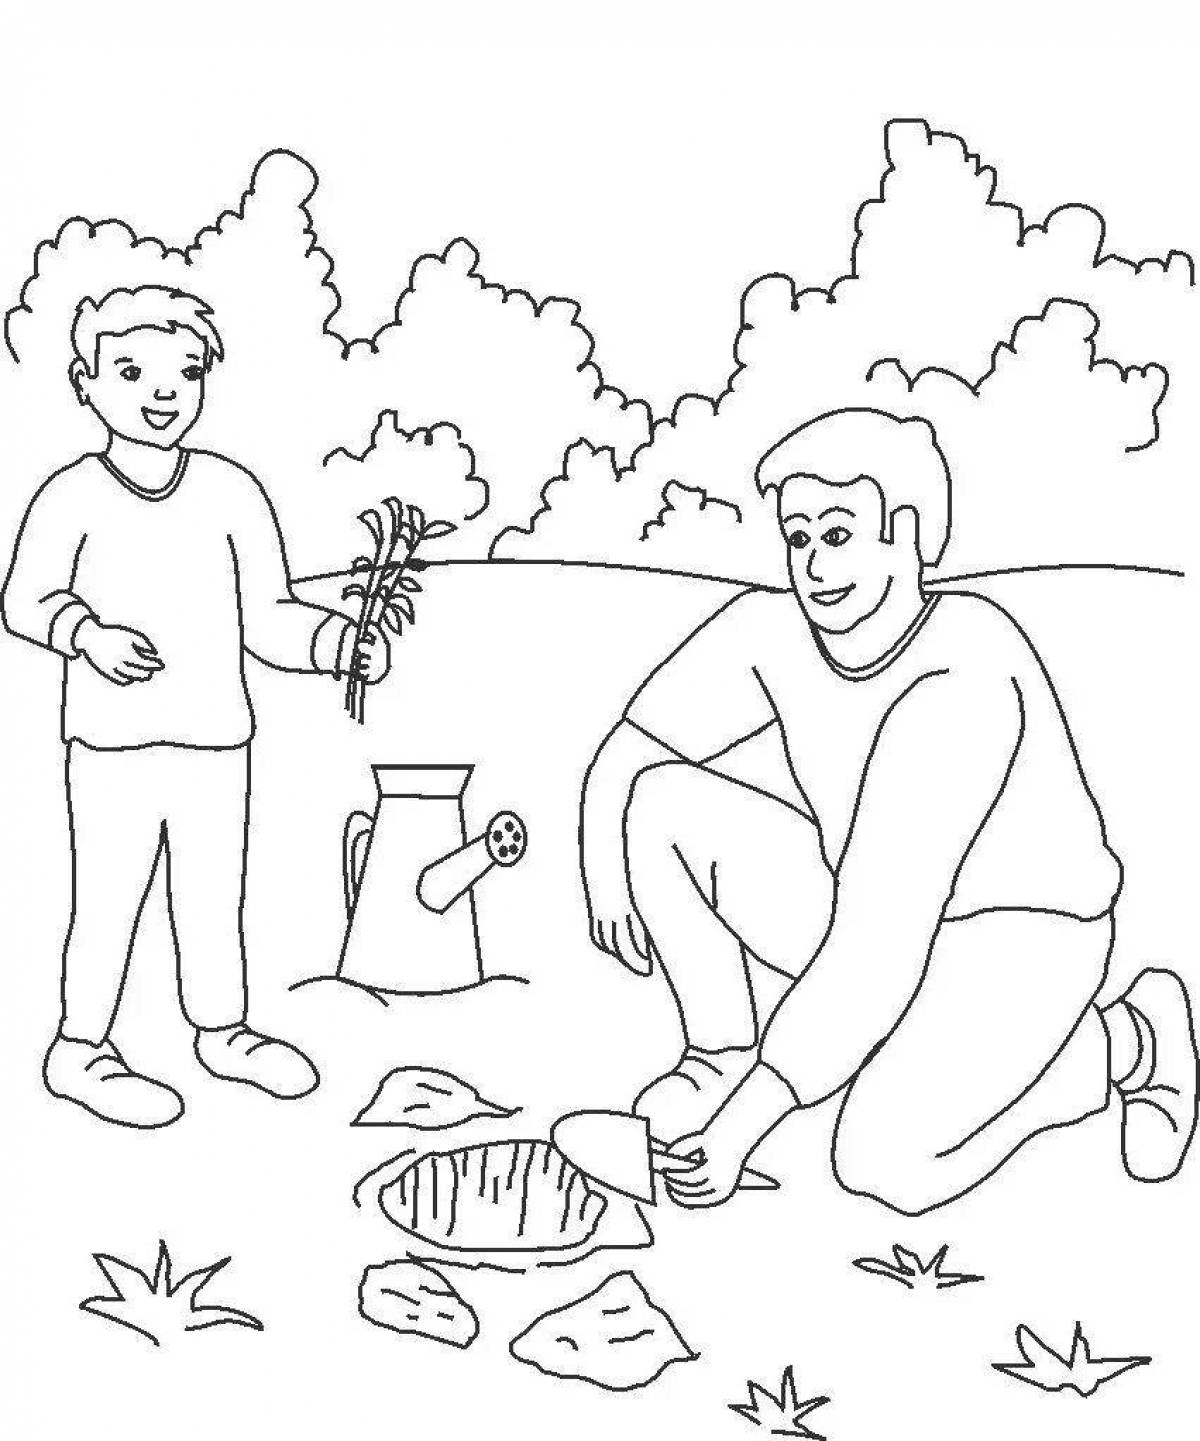 Awesome man and nature coloring page